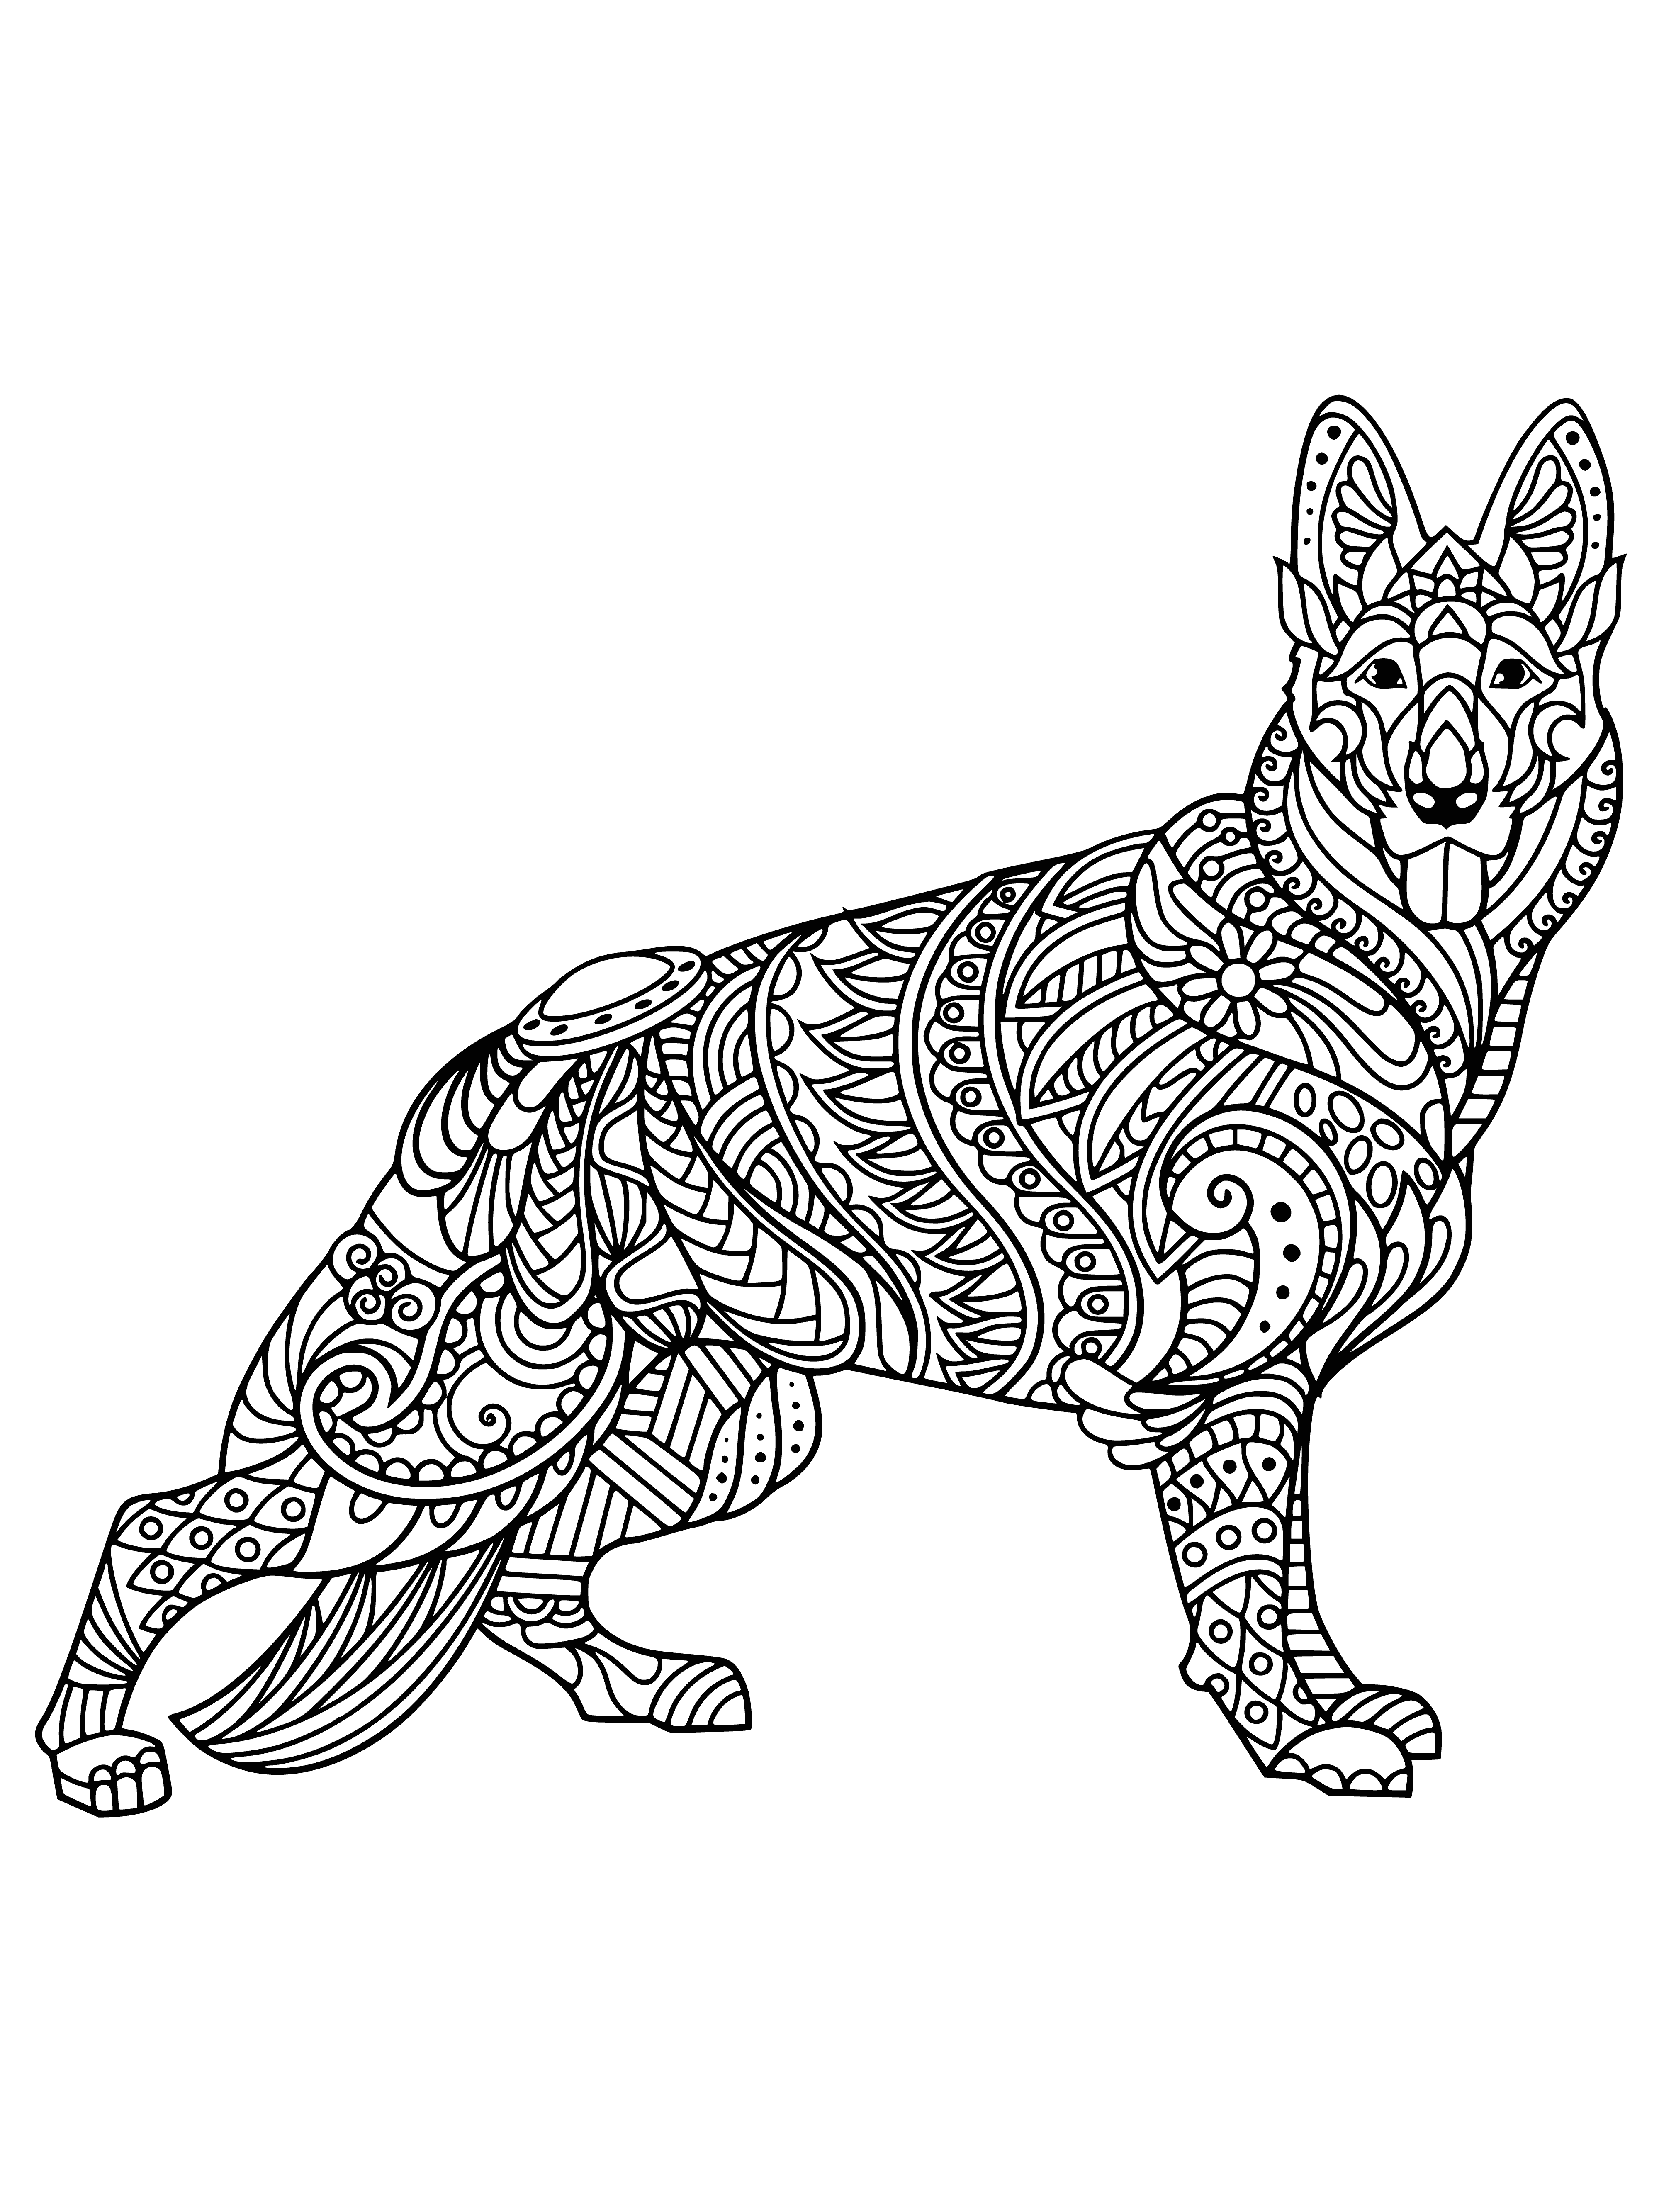 coloring page: A German Shepherd is standing in a field of flowers with a black and brown coat. #germanshepherd #coloringpage